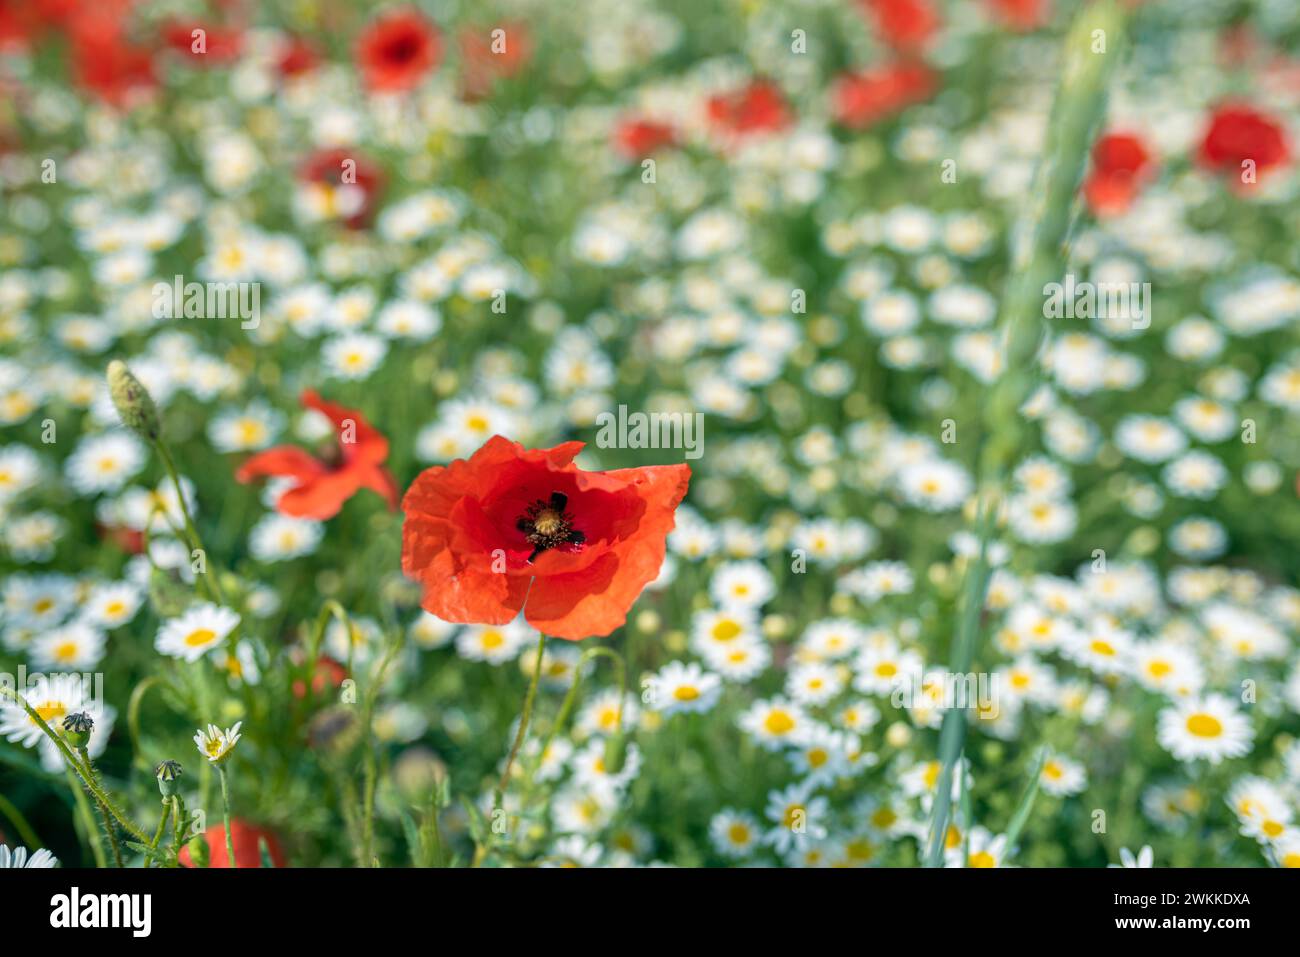 Sea of flowers of white and yellow flowers of odorless chamomile, in between red poppies. The photo radiates positive energy and is very decorative wh Stock Photo